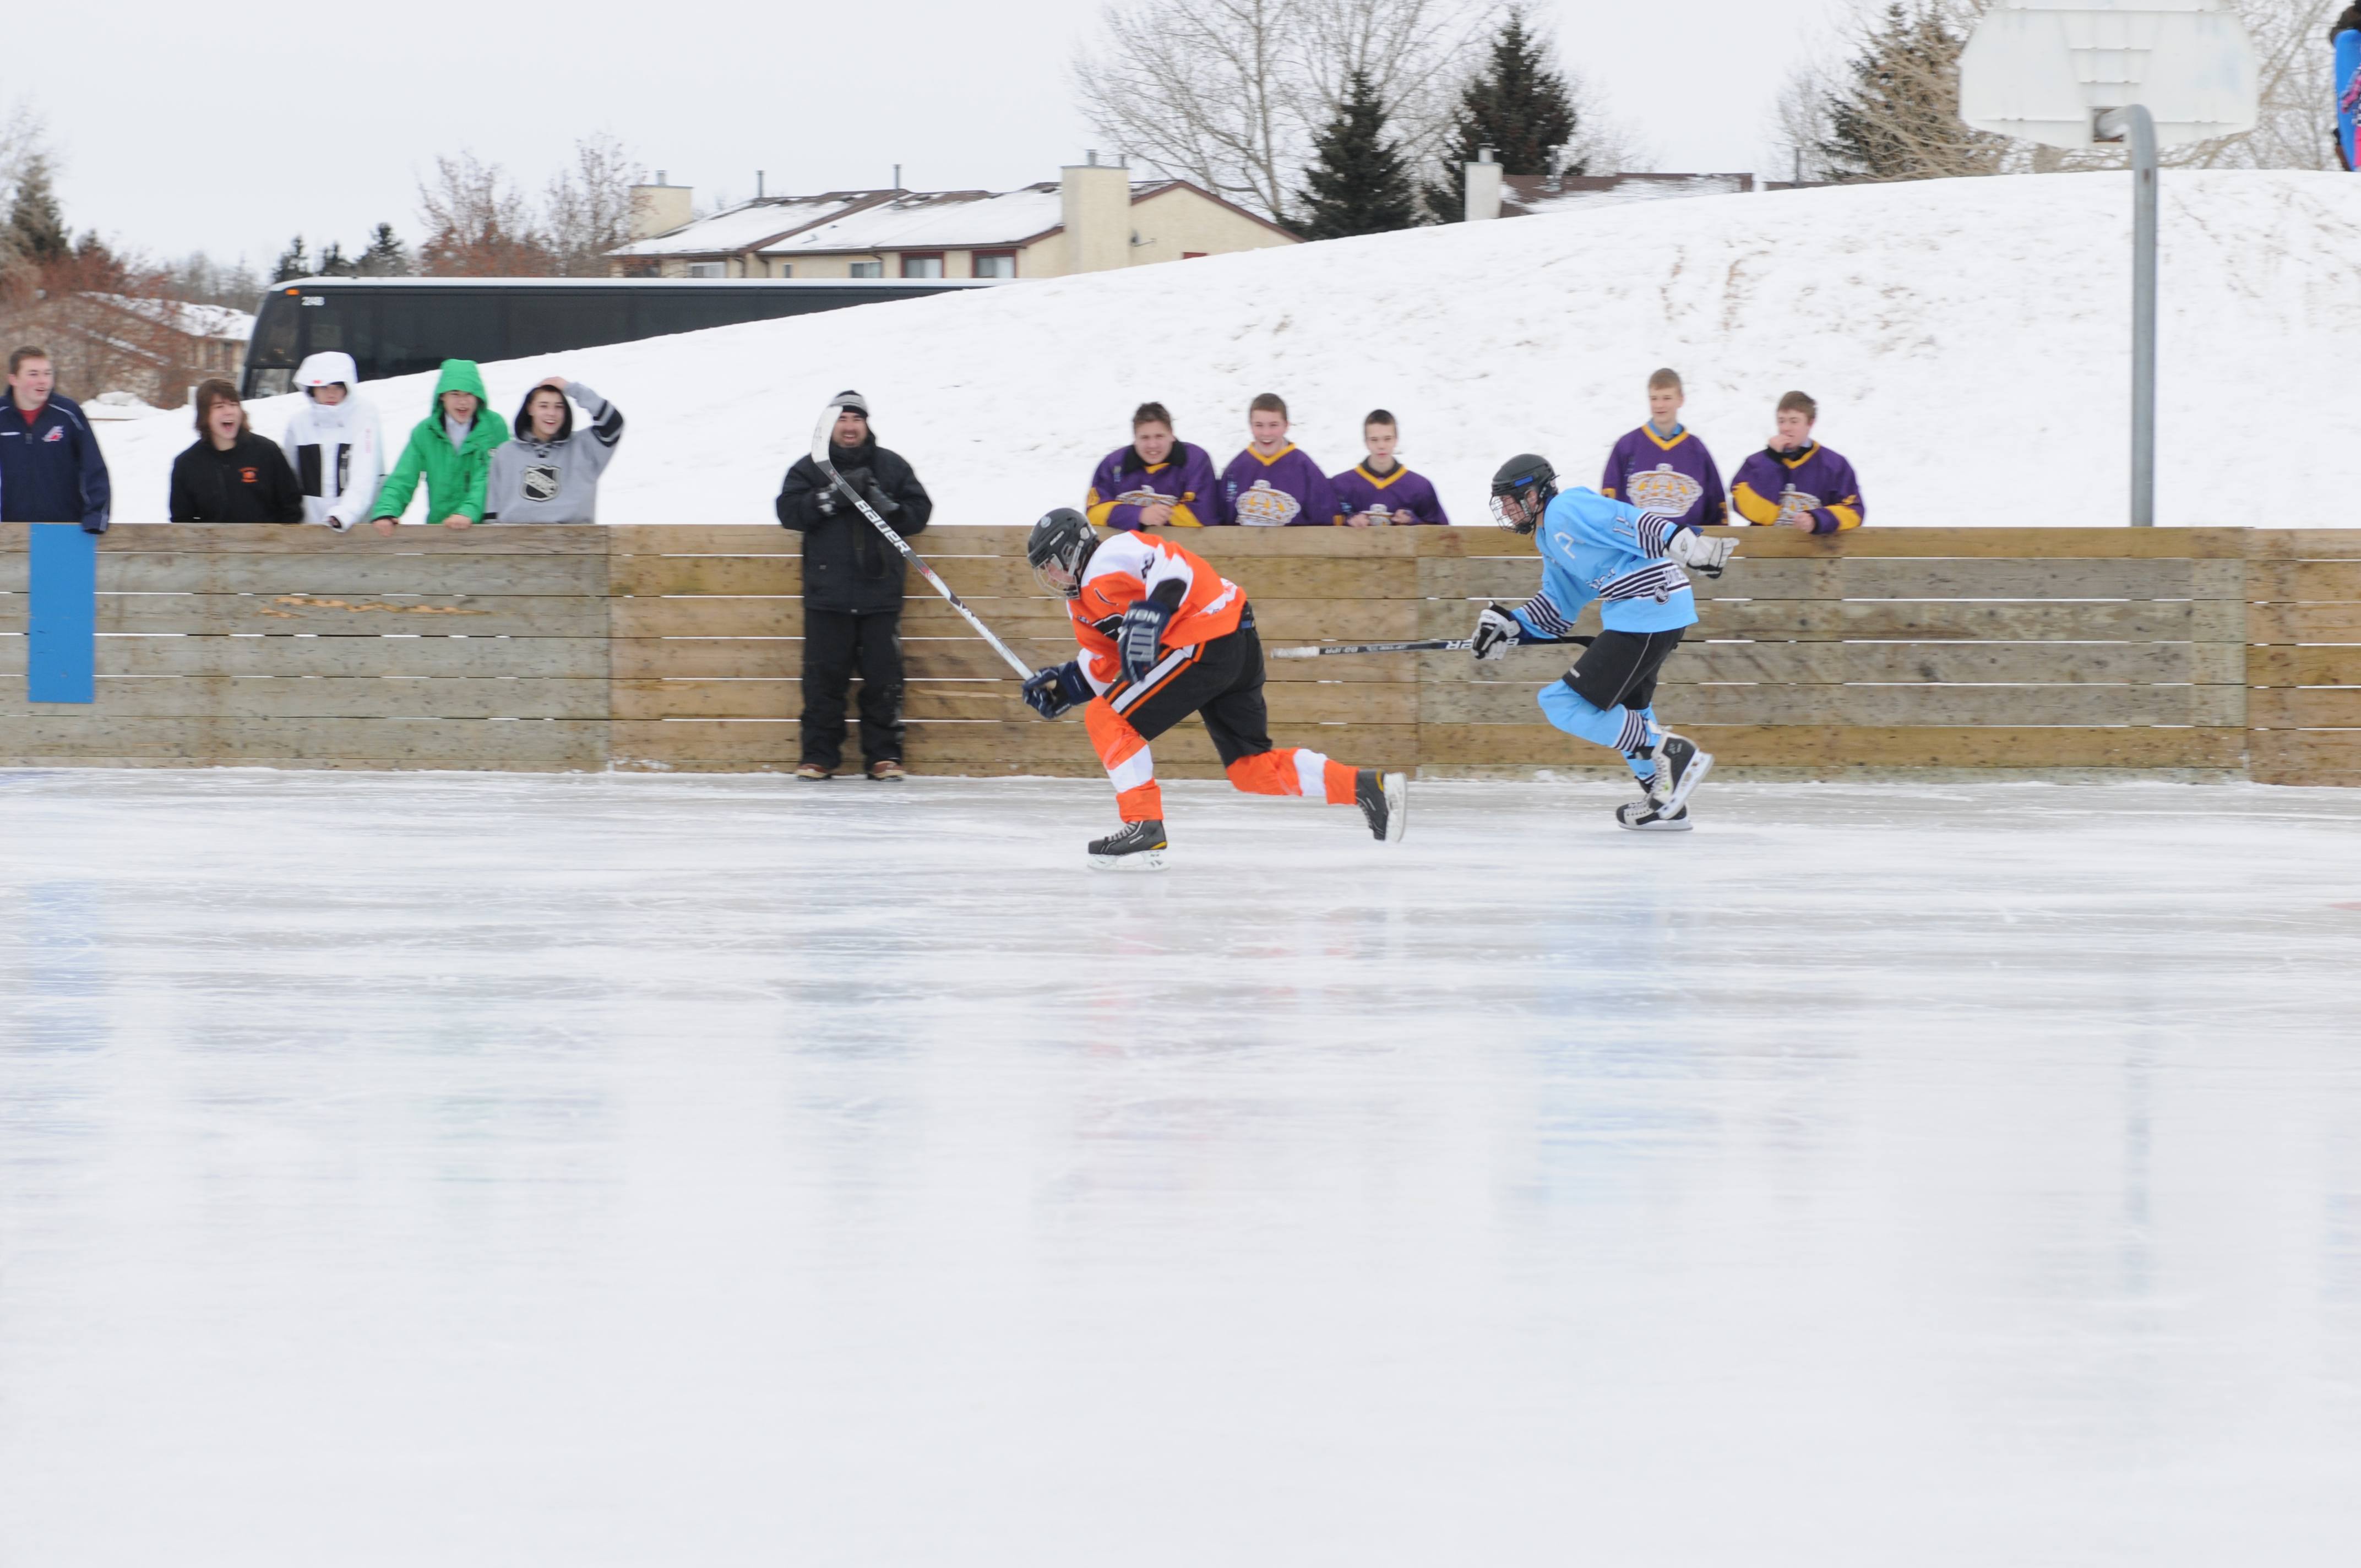 RACE- Hockey players from all over Alberta made their way to Red Deer this past weekend for a skills competition as well as to play against each other on an outdoor rink.